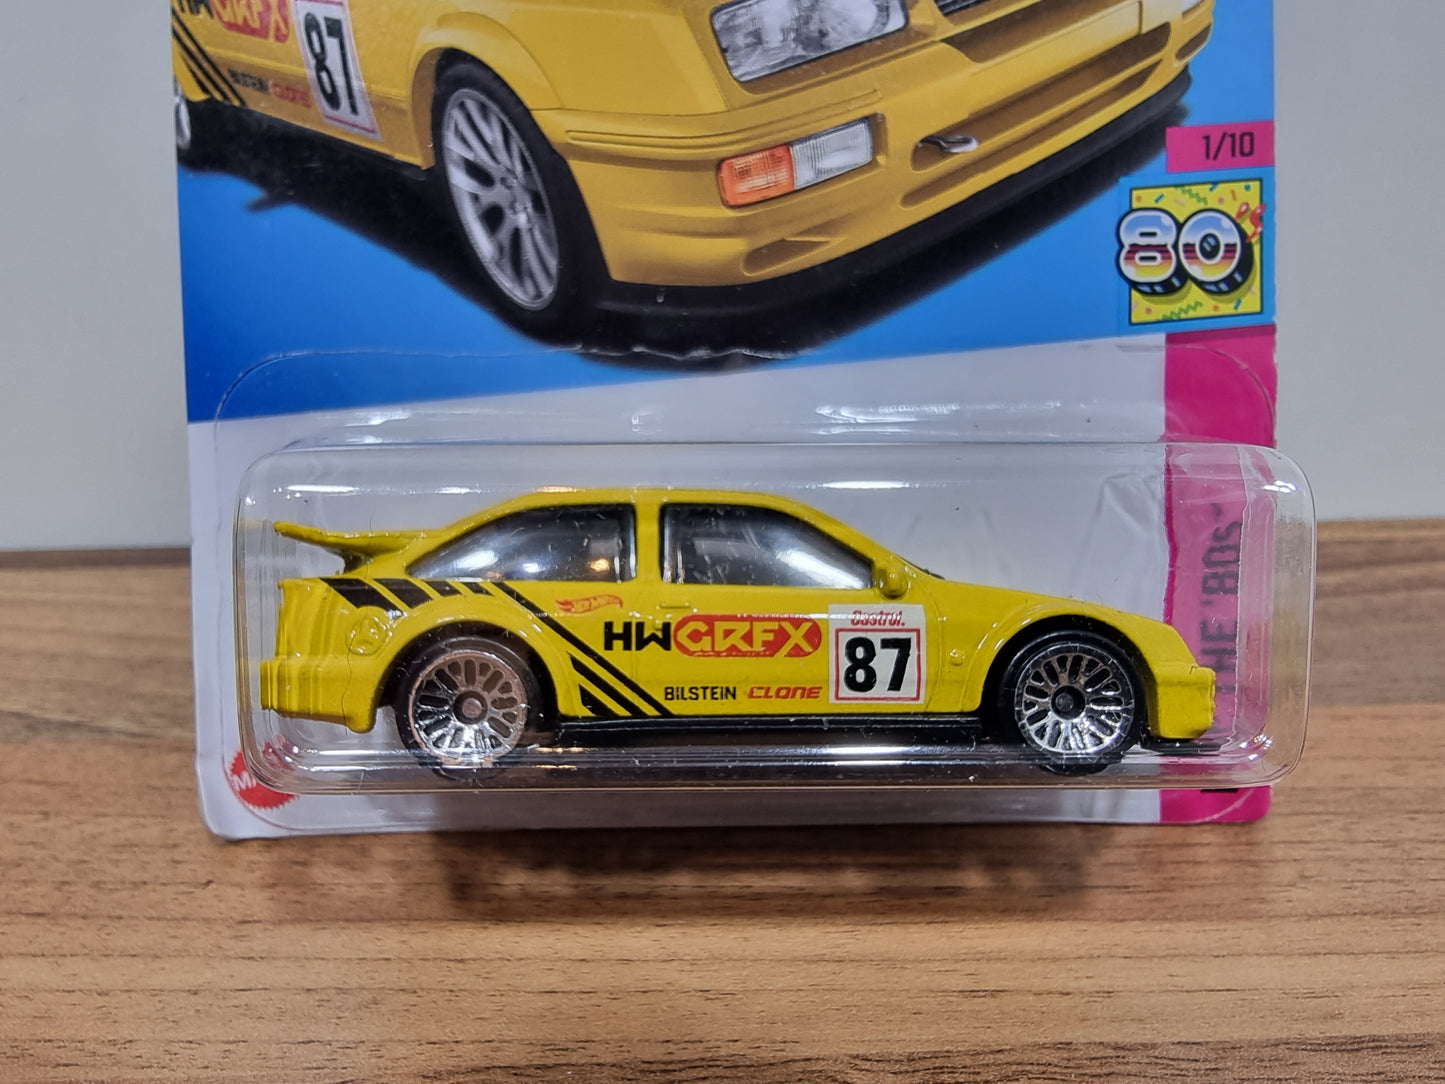 Hot Wheels '87 Ford Sierra Cosworth (USA Exclusive)